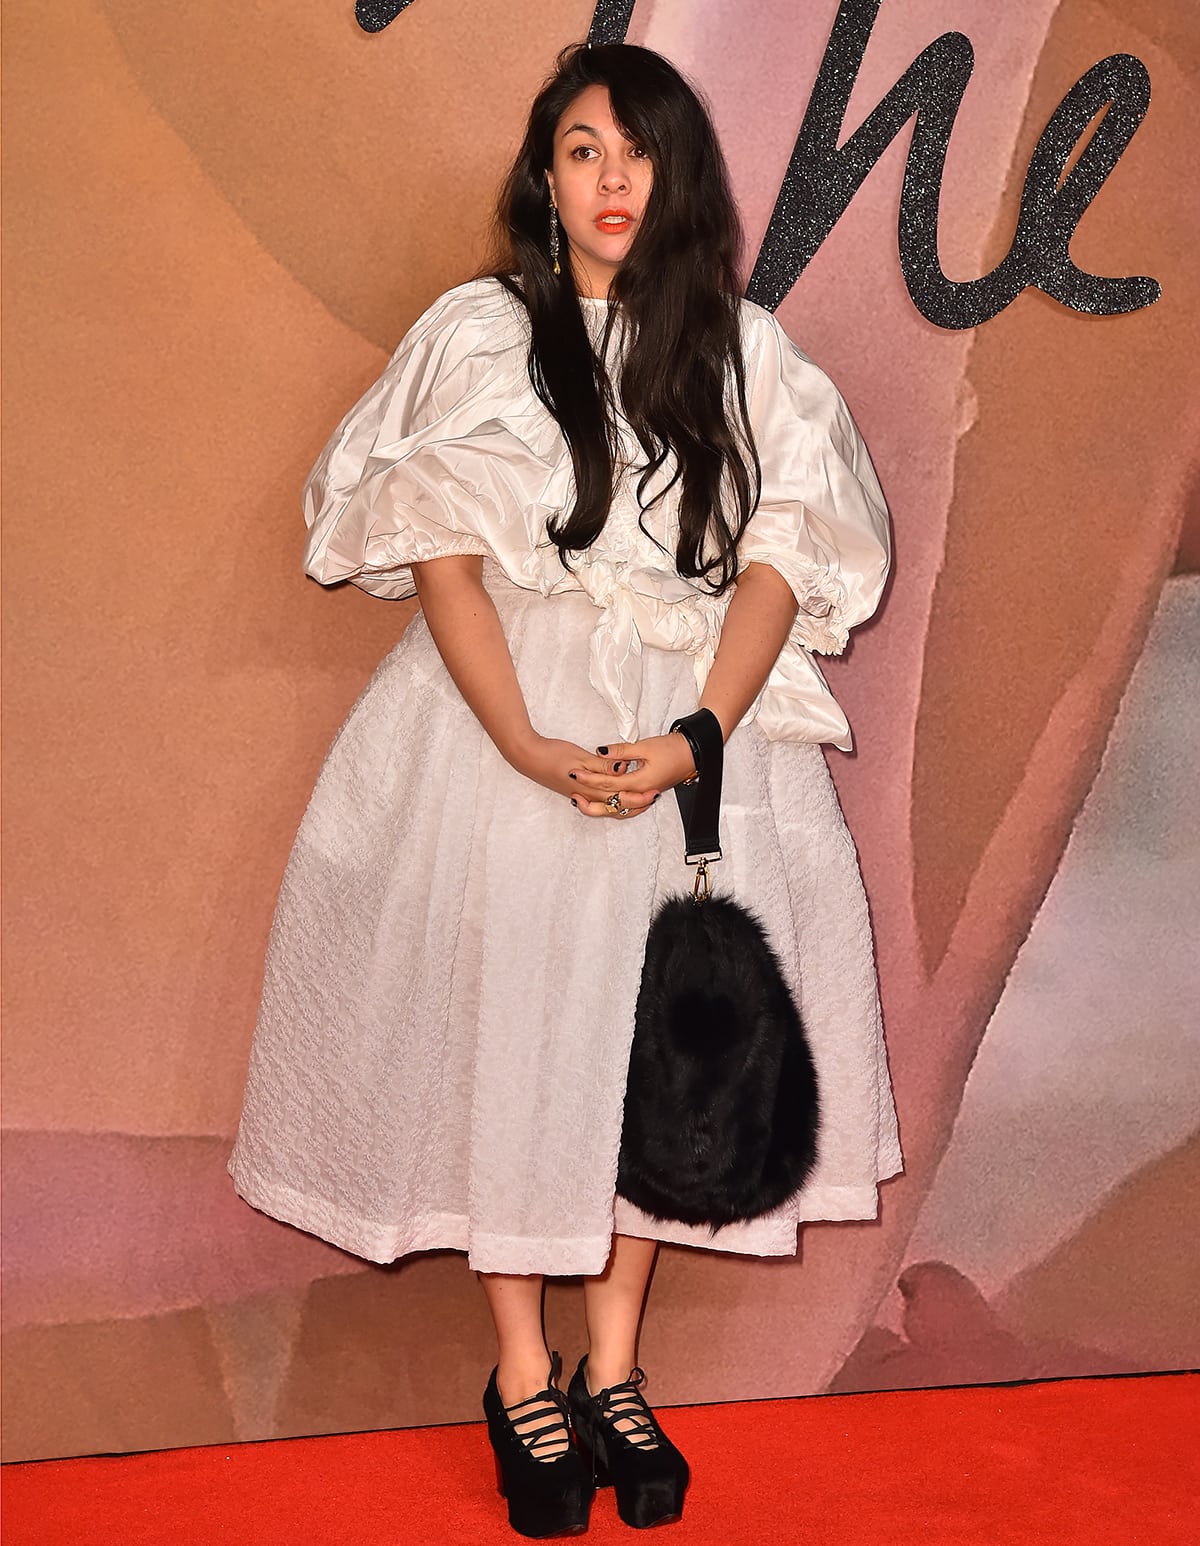 Simone Rocha got her start in fashion design by working at her father's studio and later studying at National College of Art and Design